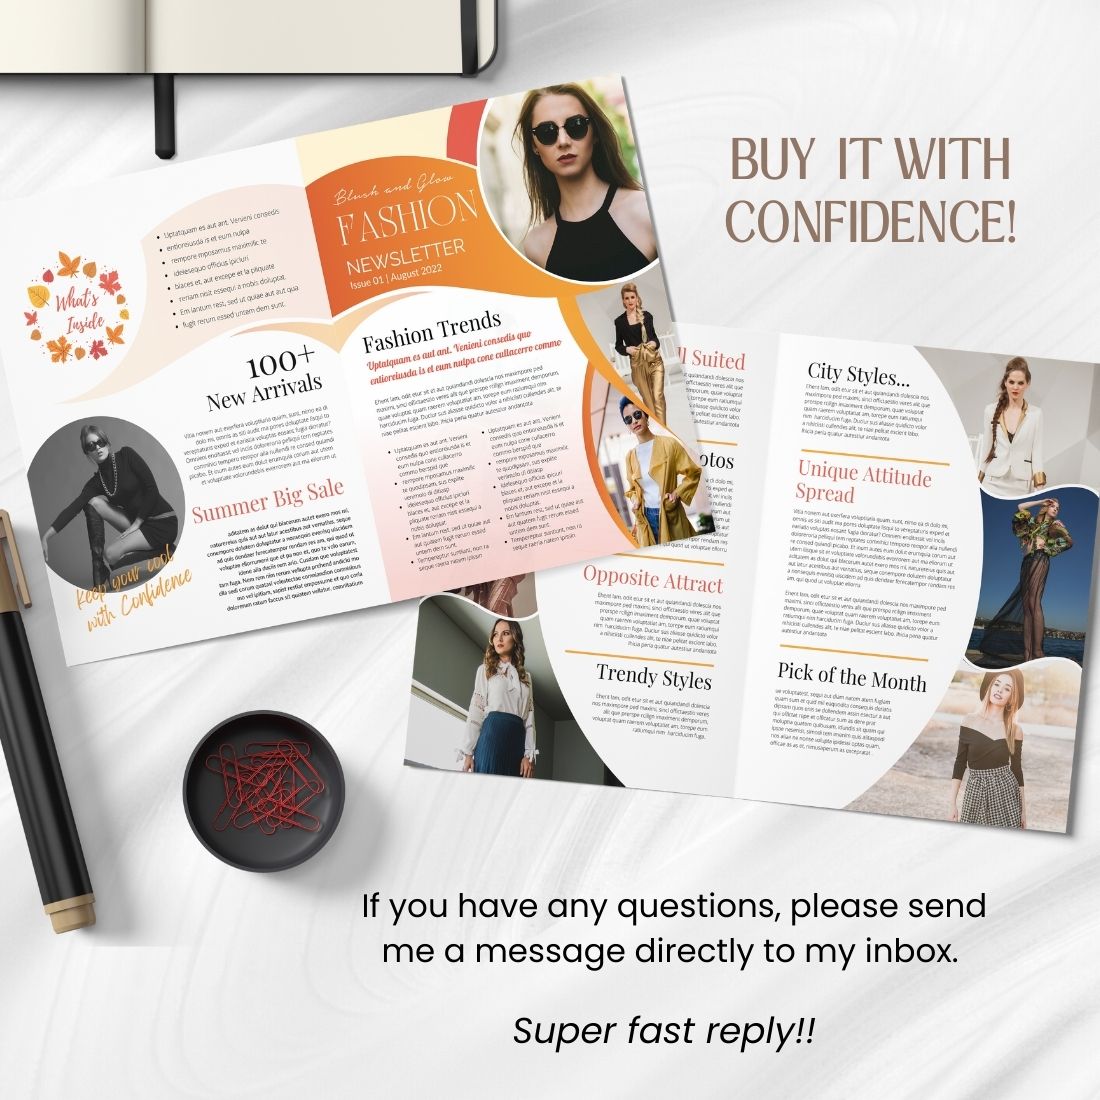 Buy Canva Newsletter Template For Models and Fashion with confidence.